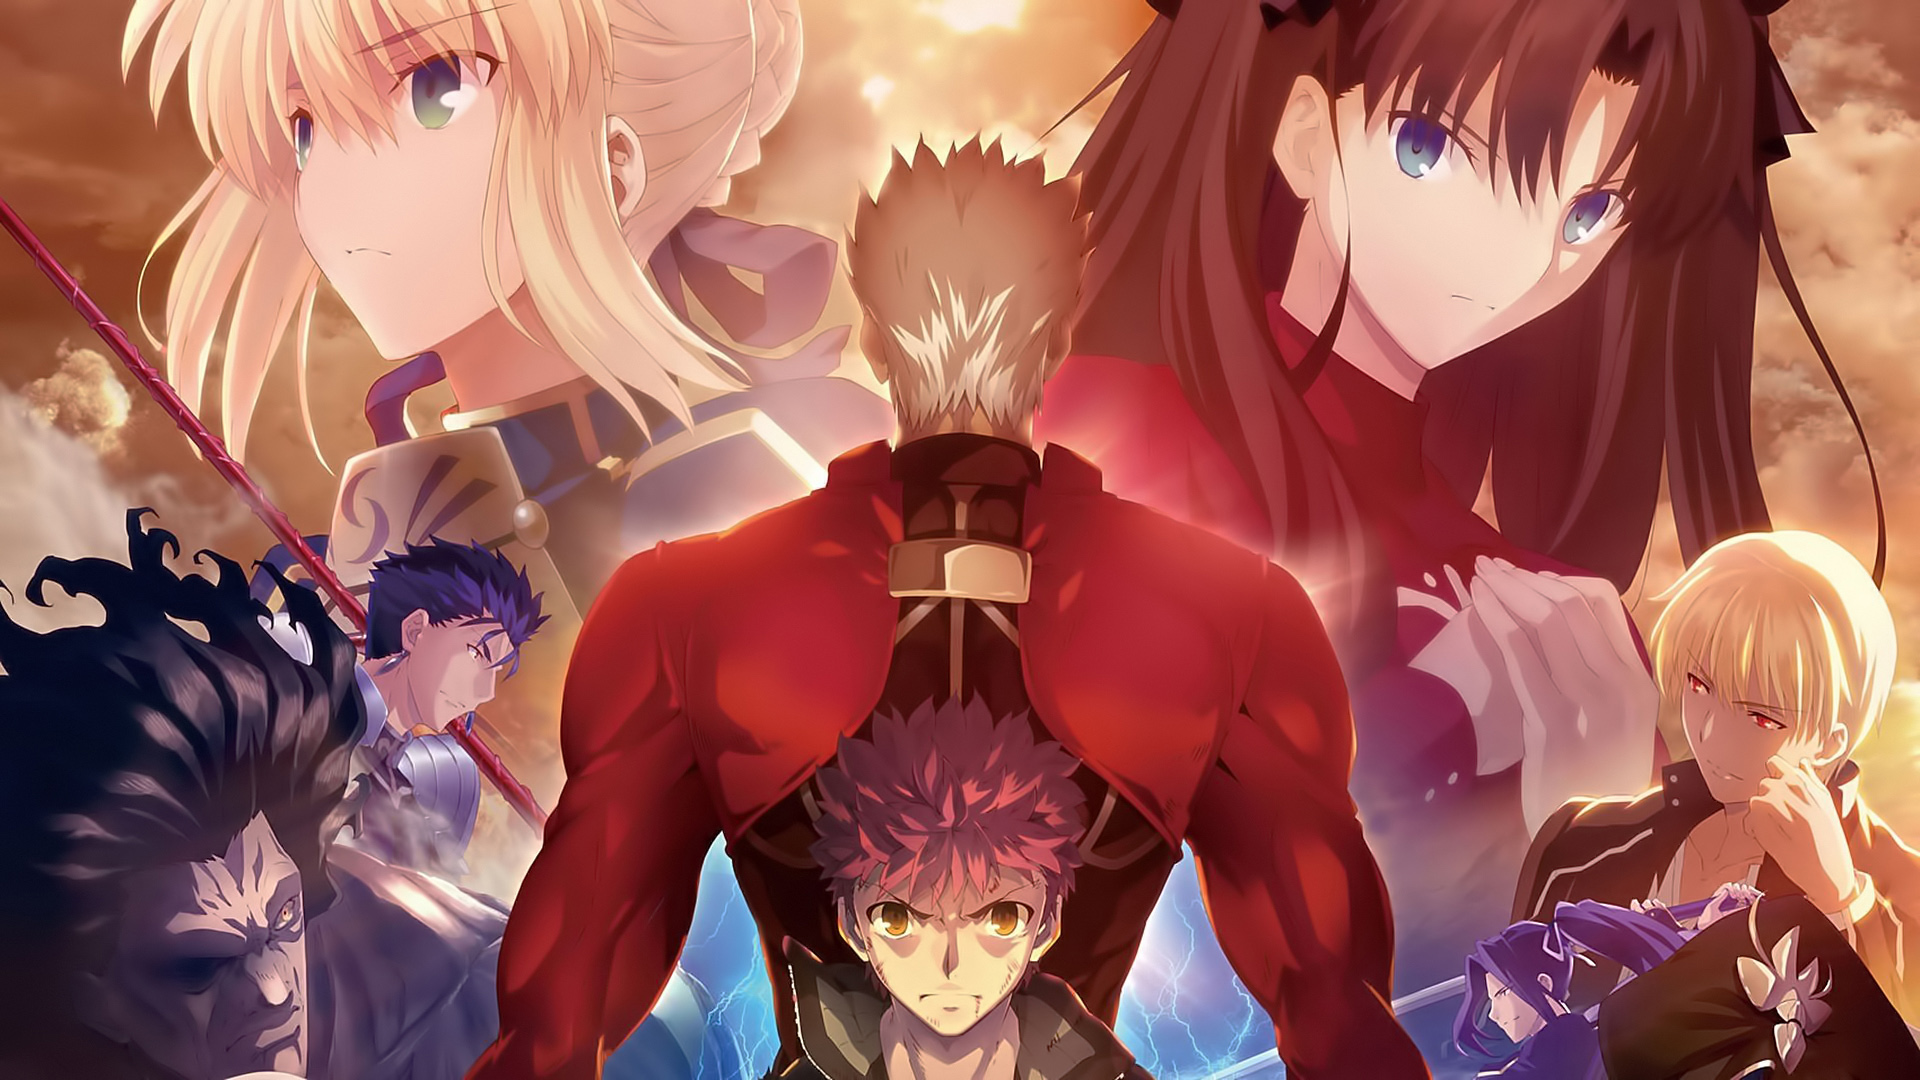 About Fate Release Date